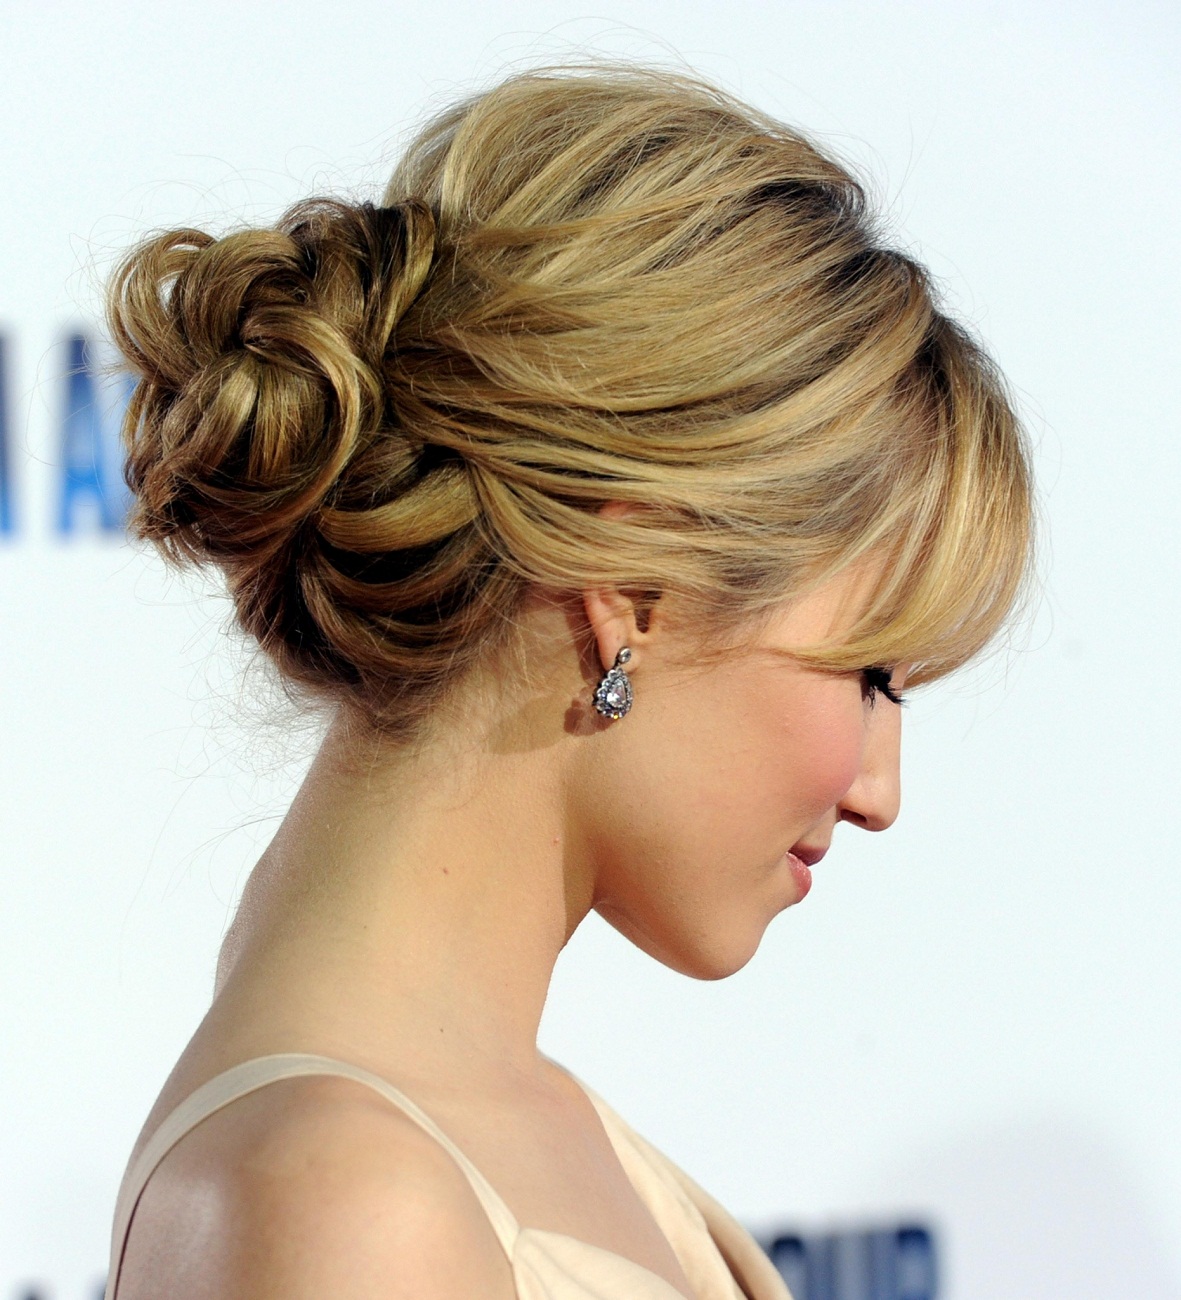 Prom hairstyles for short hair prom-hairstyles-for-short-hair-16-12